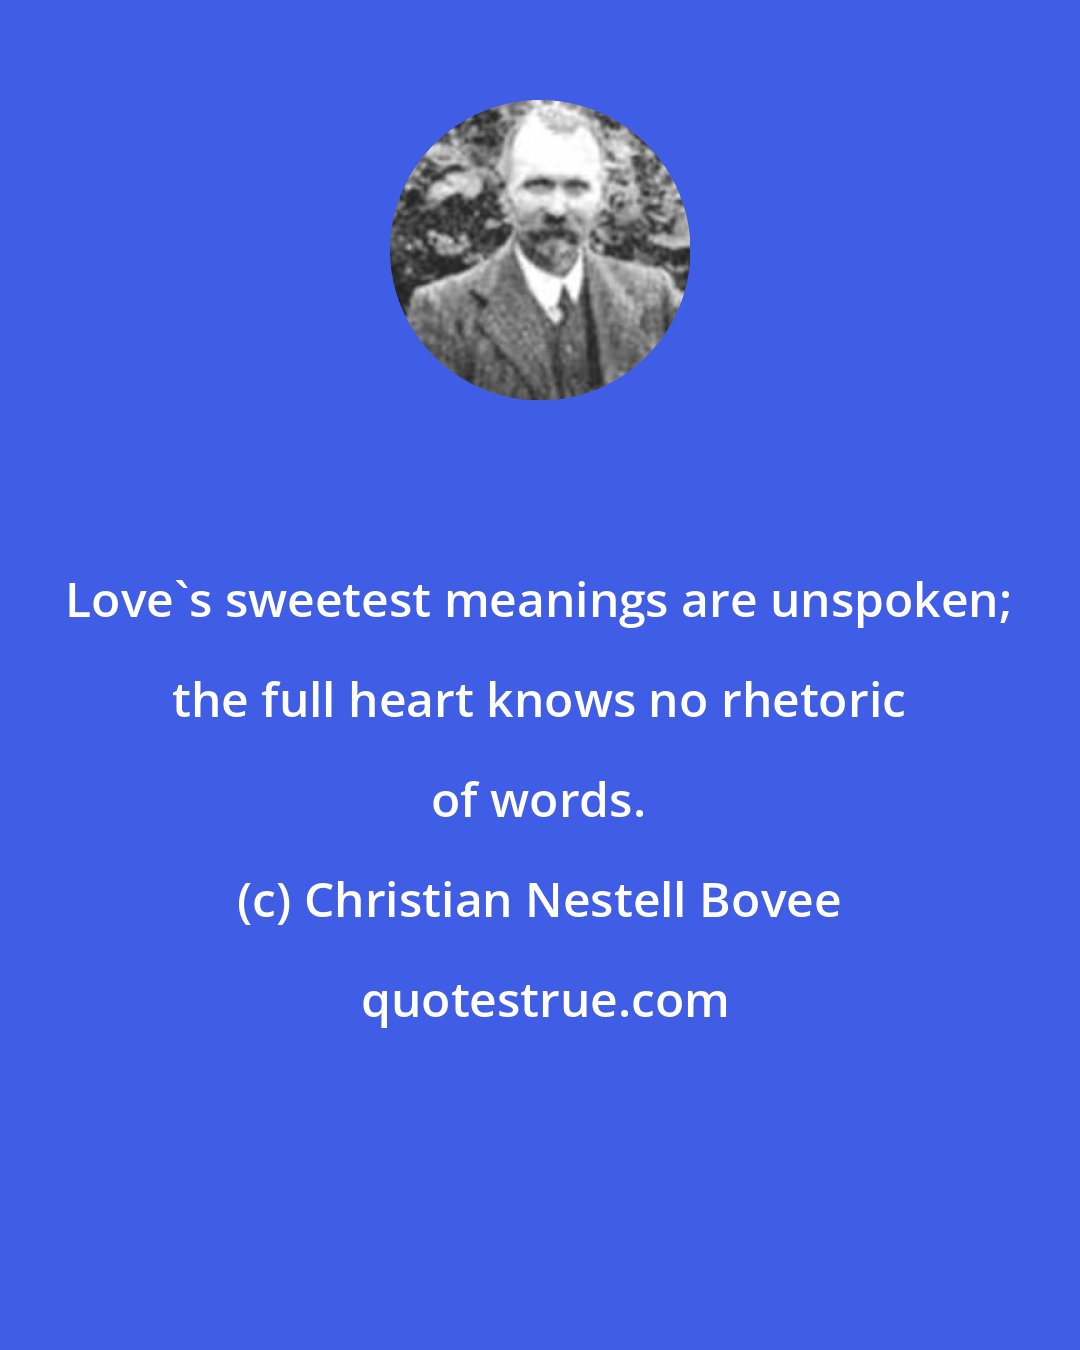 Christian Nestell Bovee: Love's sweetest meanings are unspoken; the full heart knows no rhetoric of words.